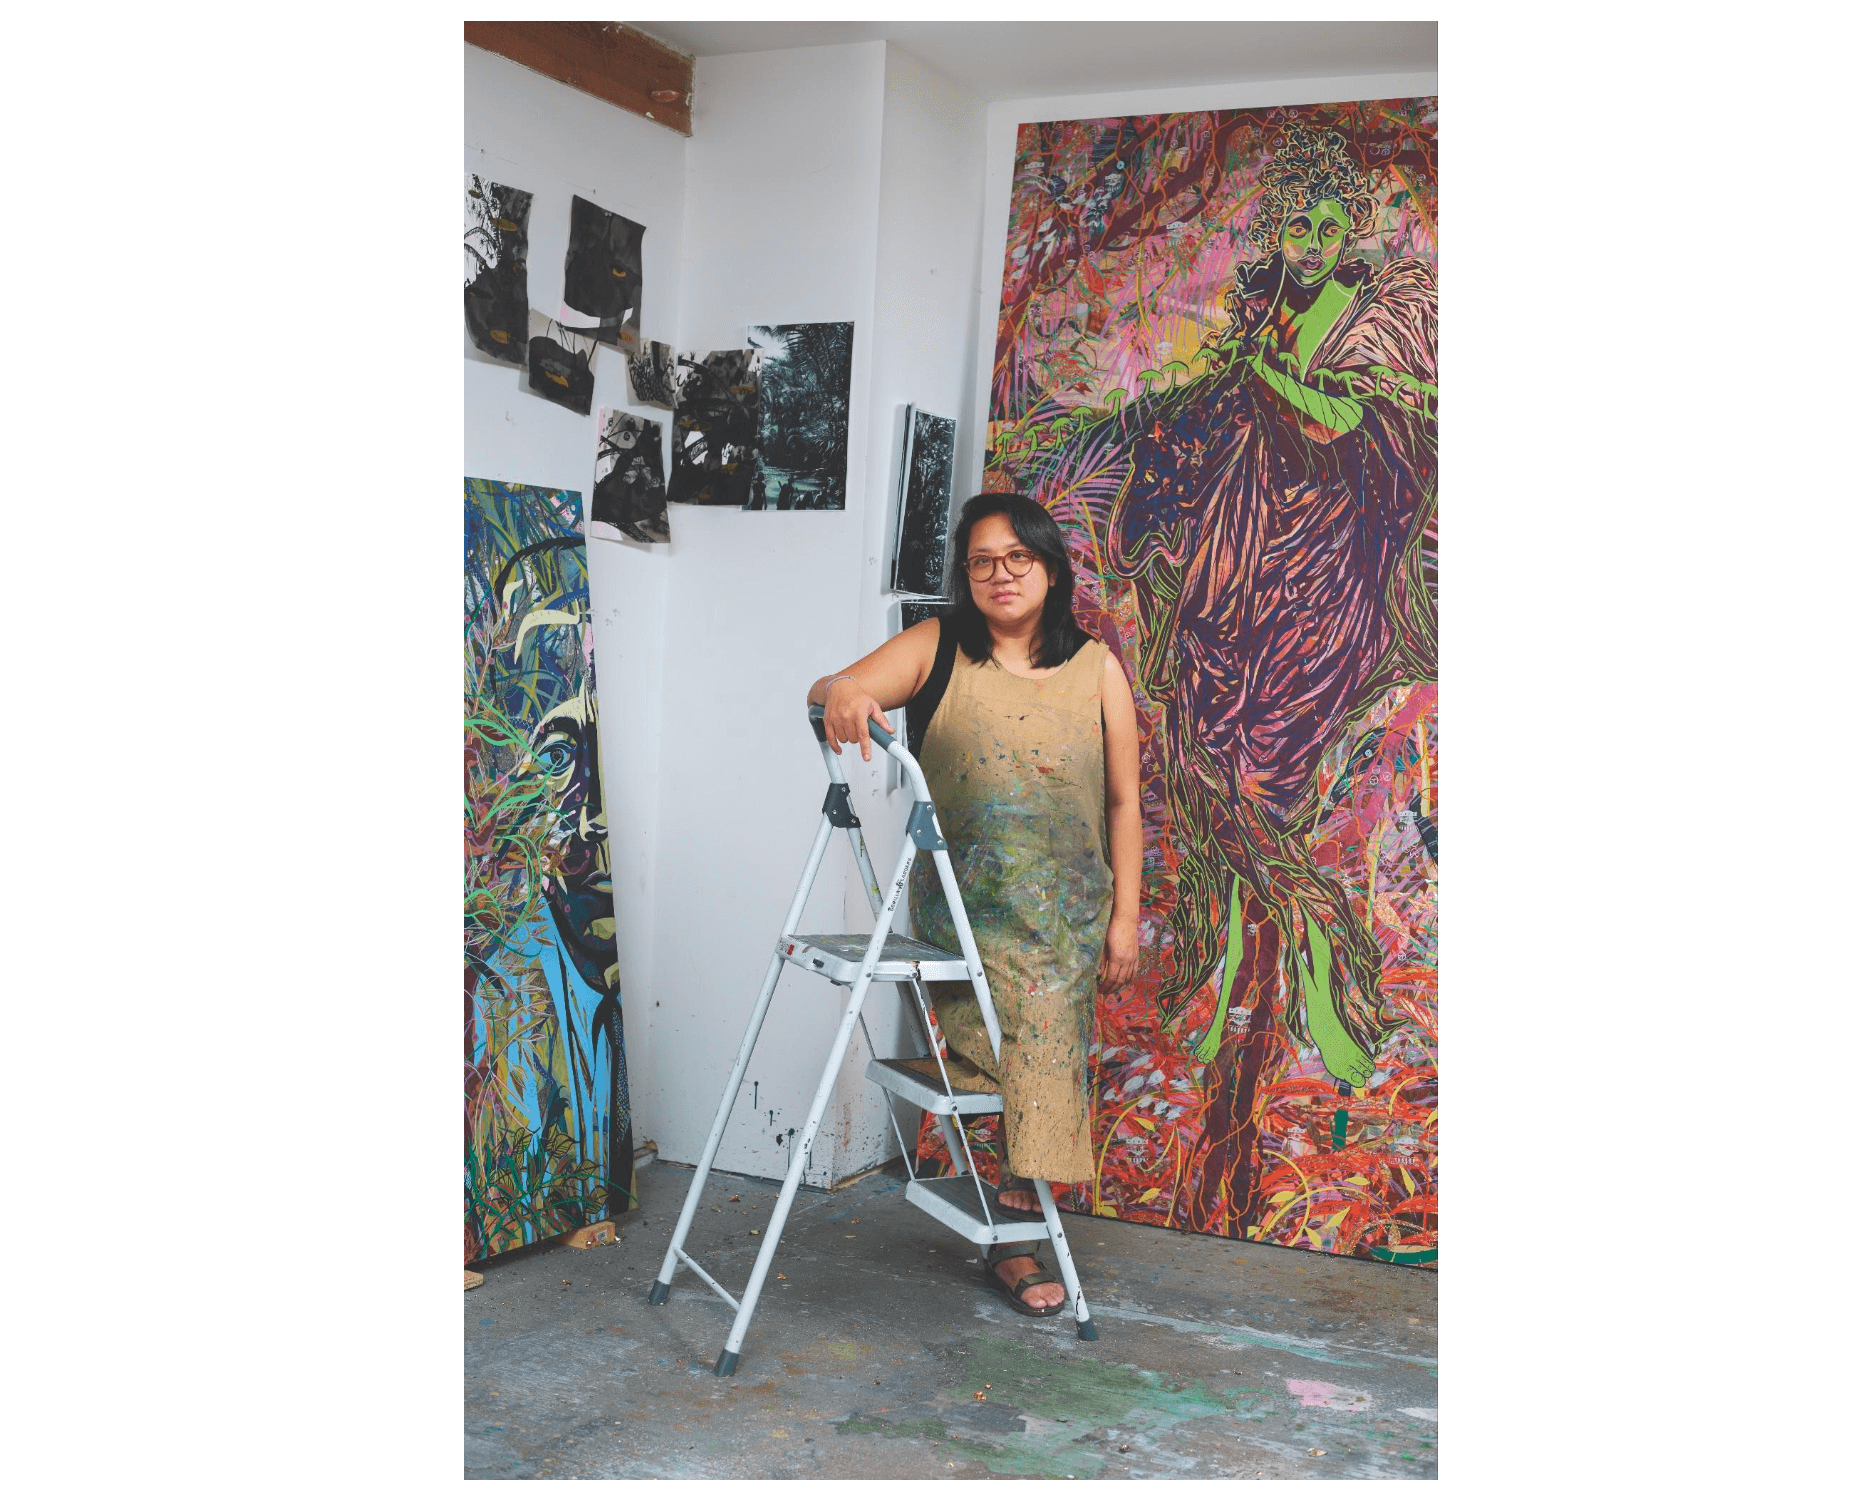 Tammy Nguyen stands by a ladder in her Connecticut studio, positioned in front of a large work of art.